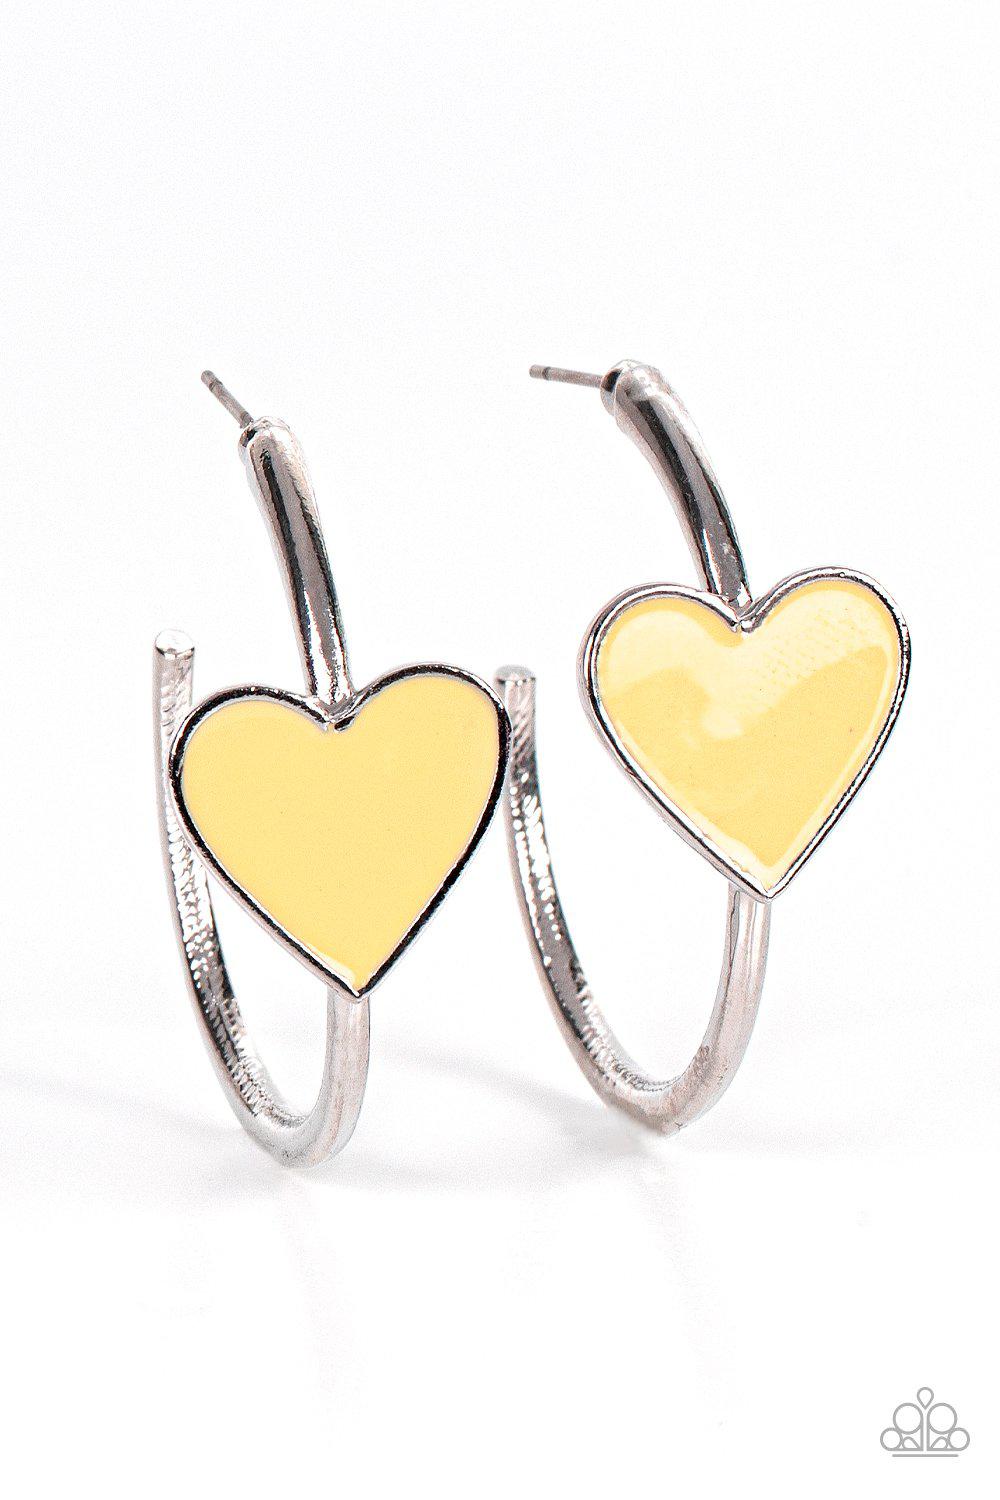 Kiss Up Yellow and Silver Heart Hoop Earrings - Paparazzi Accessories- lightbox - CarasShop.com - $5 Jewelry by Cara Jewels